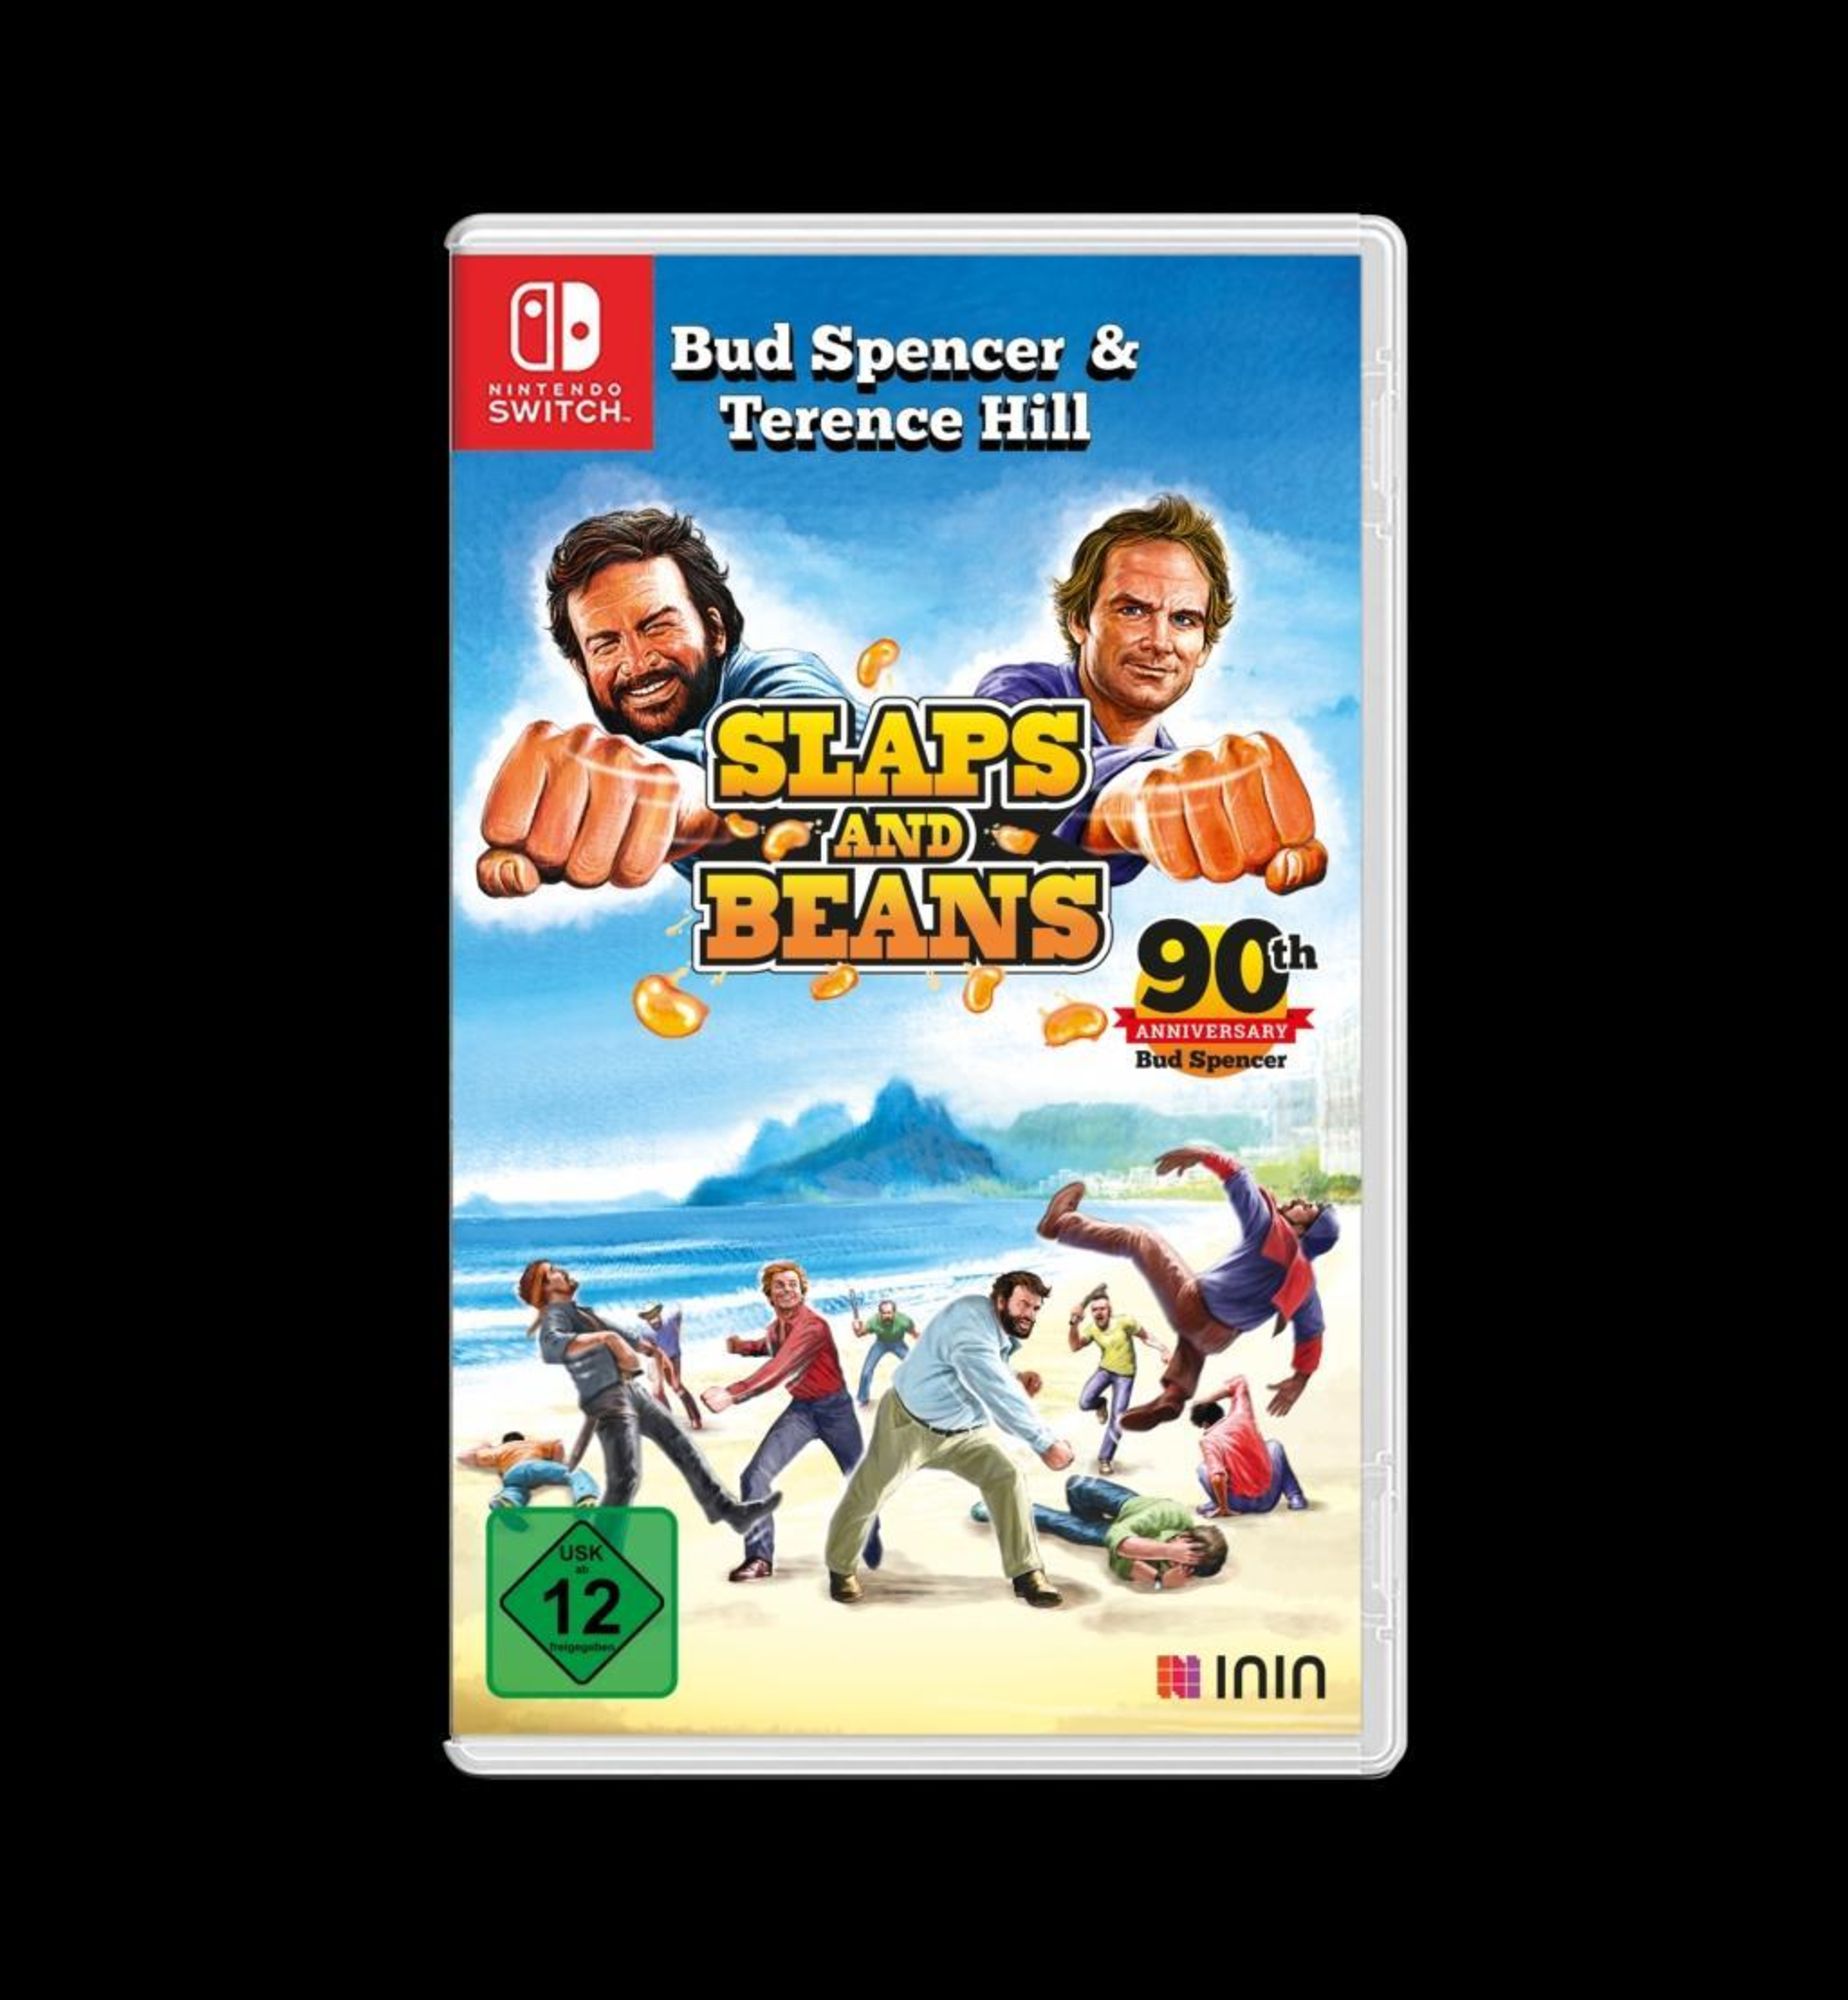 Bud Spencer & Terence Hill - Slaps and Beans\' für \'Nintendo Switch\' kaufen